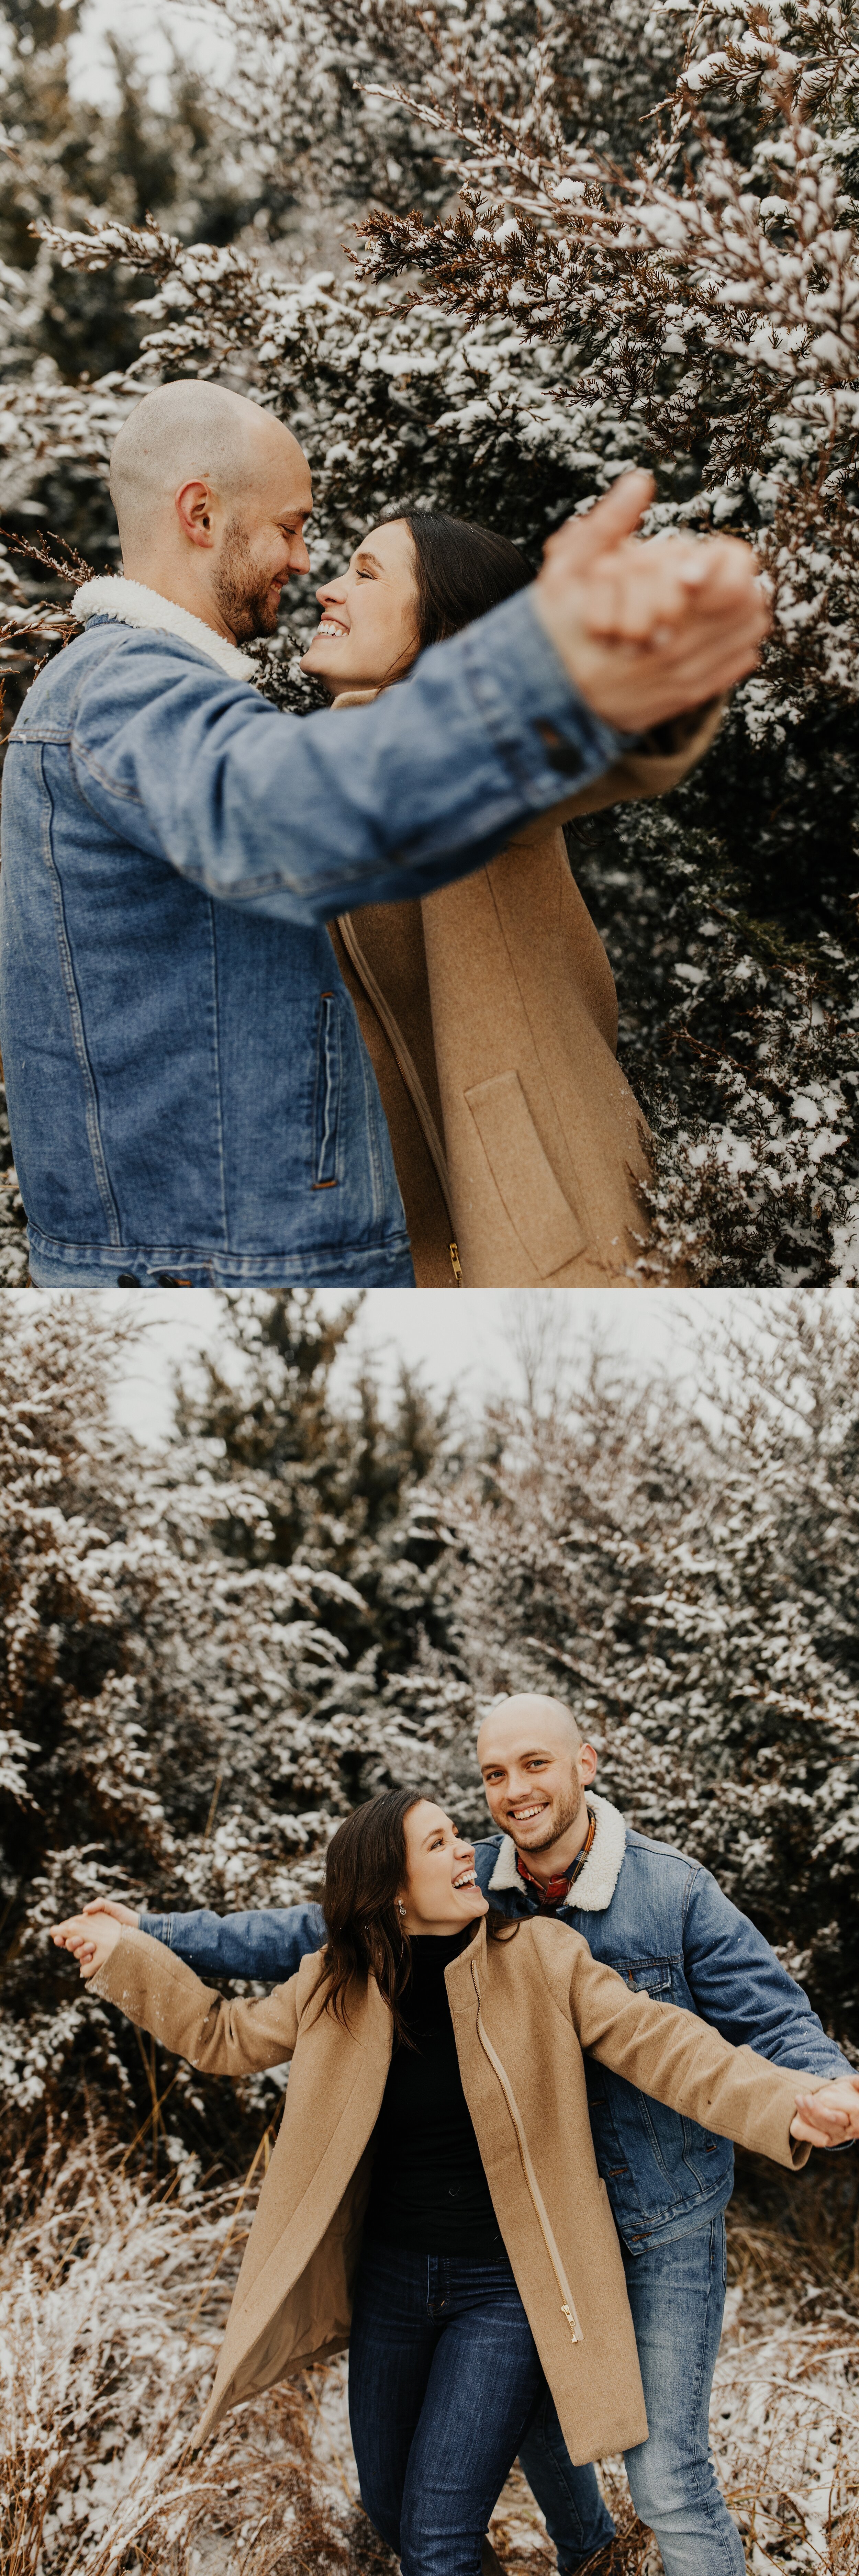 jessika-christine-photography-outdoor-engagement-couples-snow-adventurous-session (16).jpg